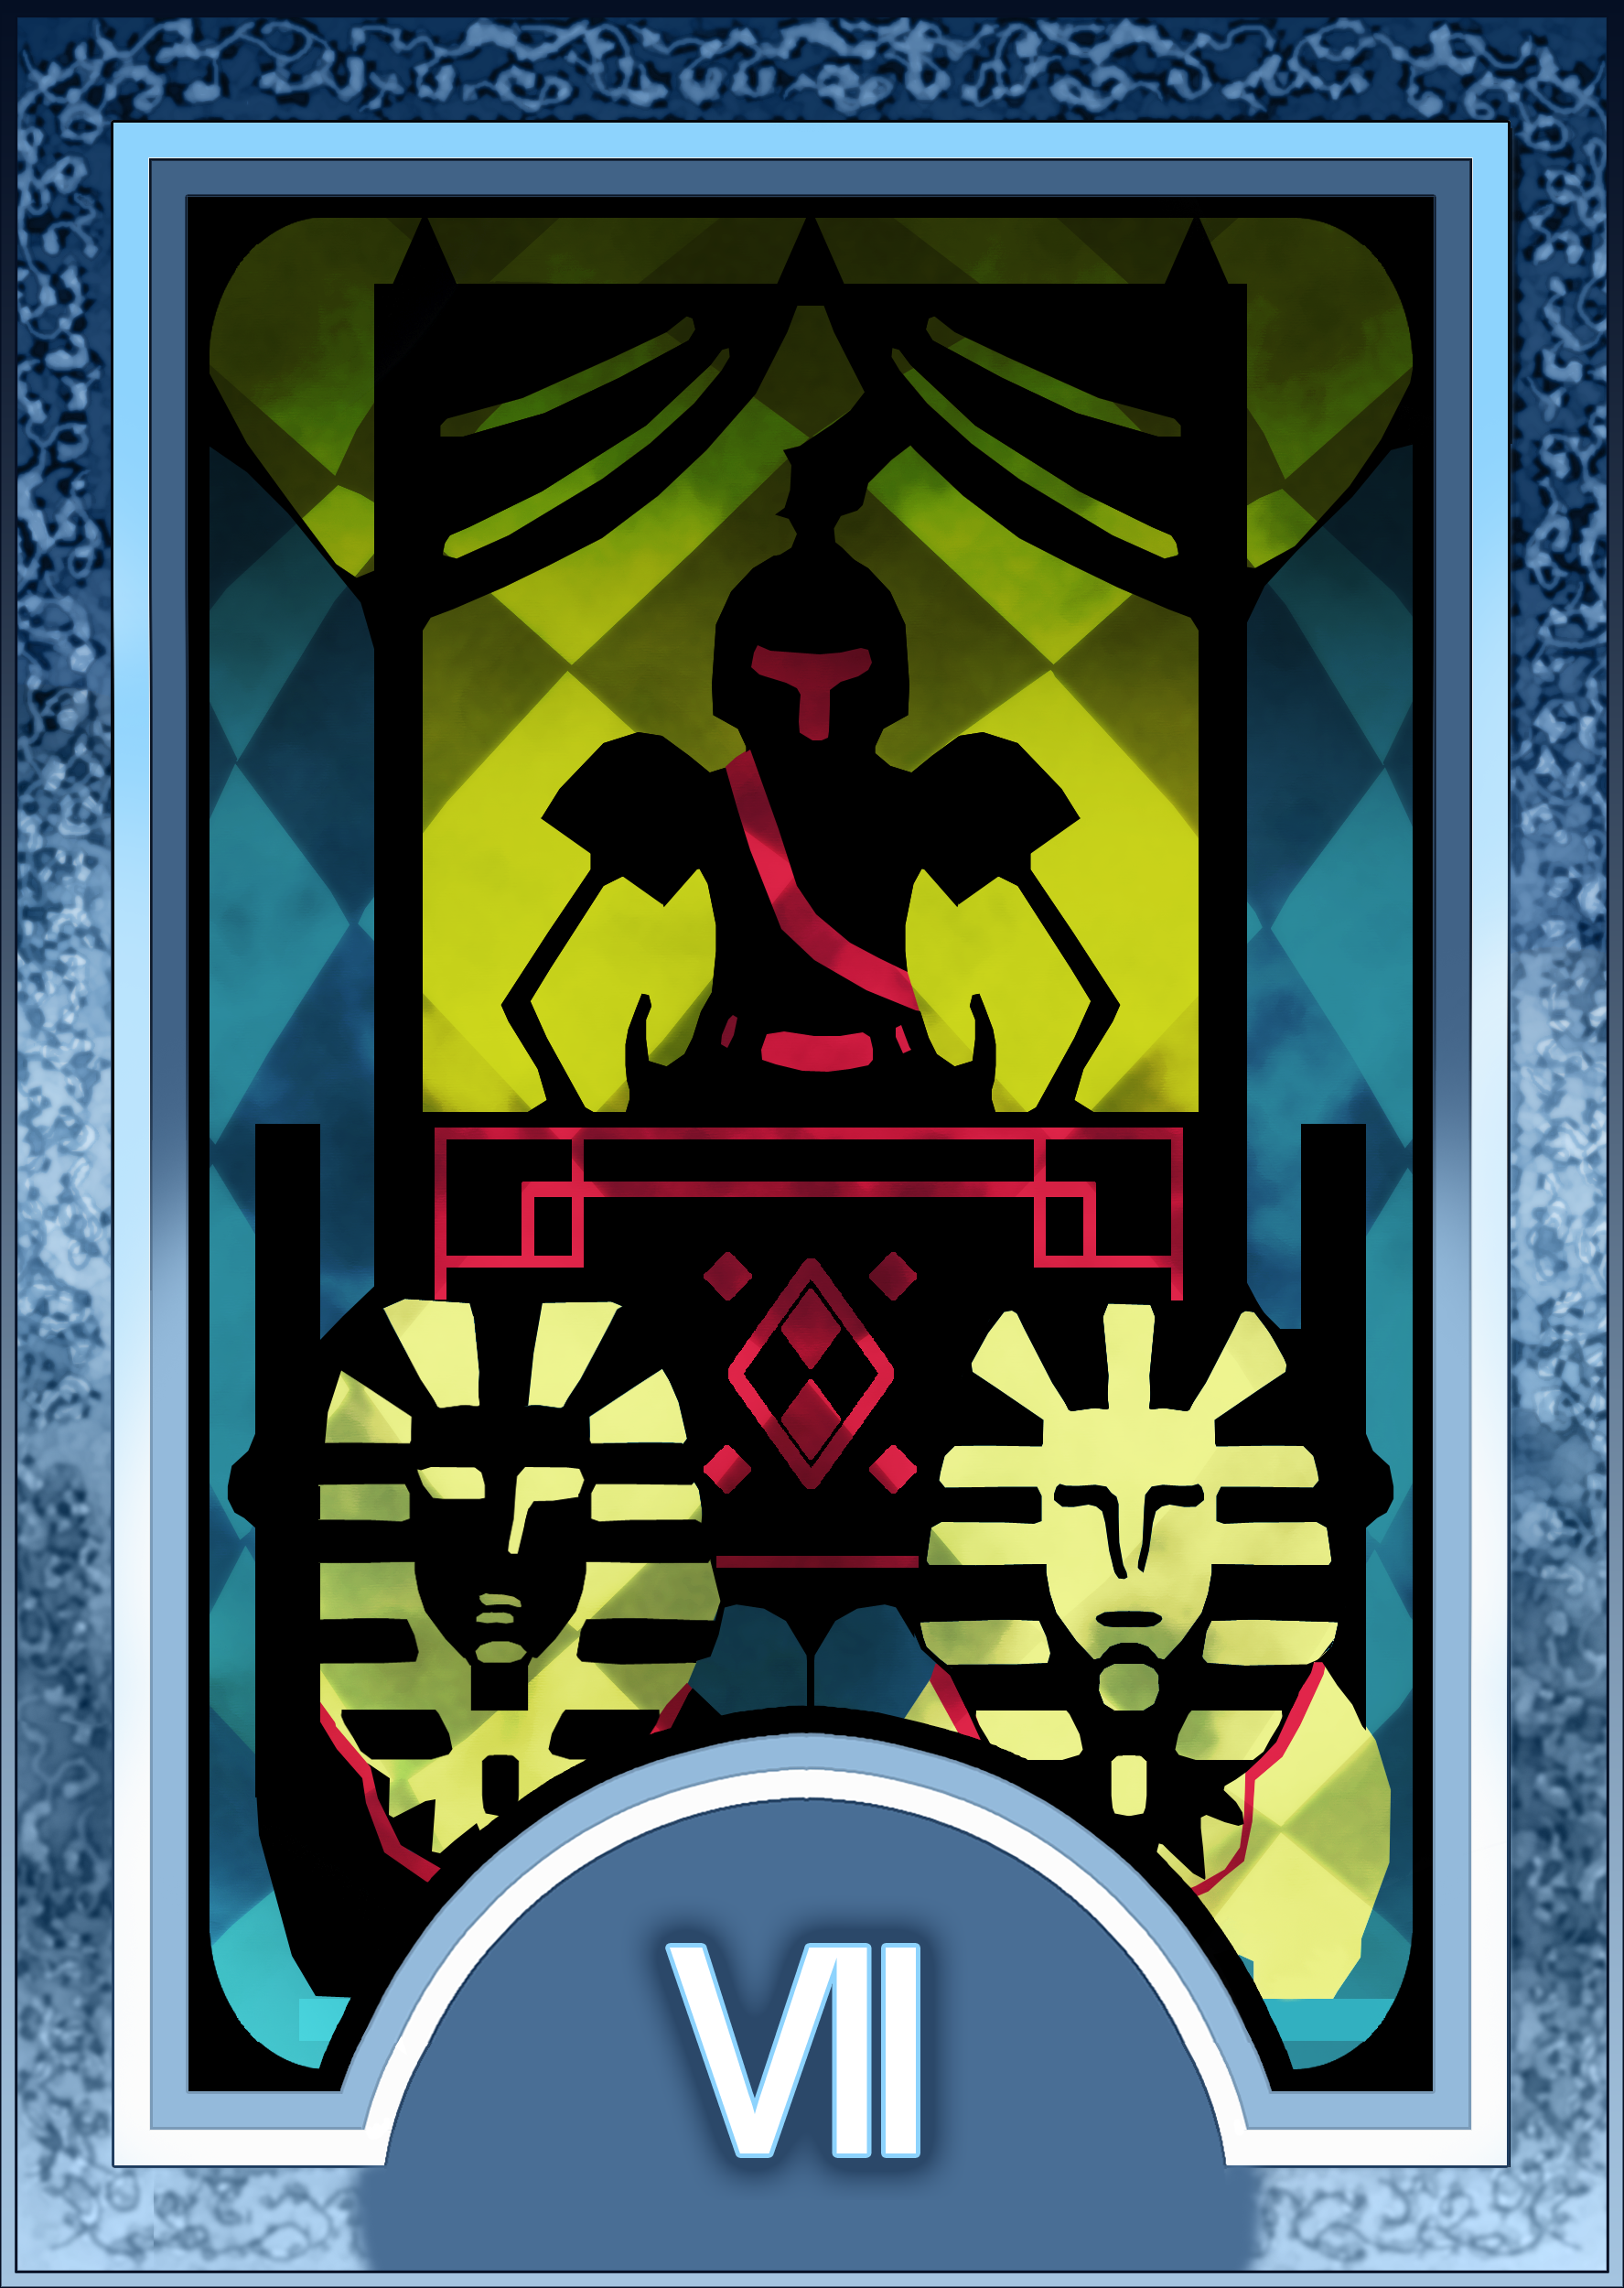 "Don't Shoot Immediately" (Dale's Social Links) Persona_3_4_tarot_card_deck_hr___chariot_arcana_by_enetirnel-d6xr7d2